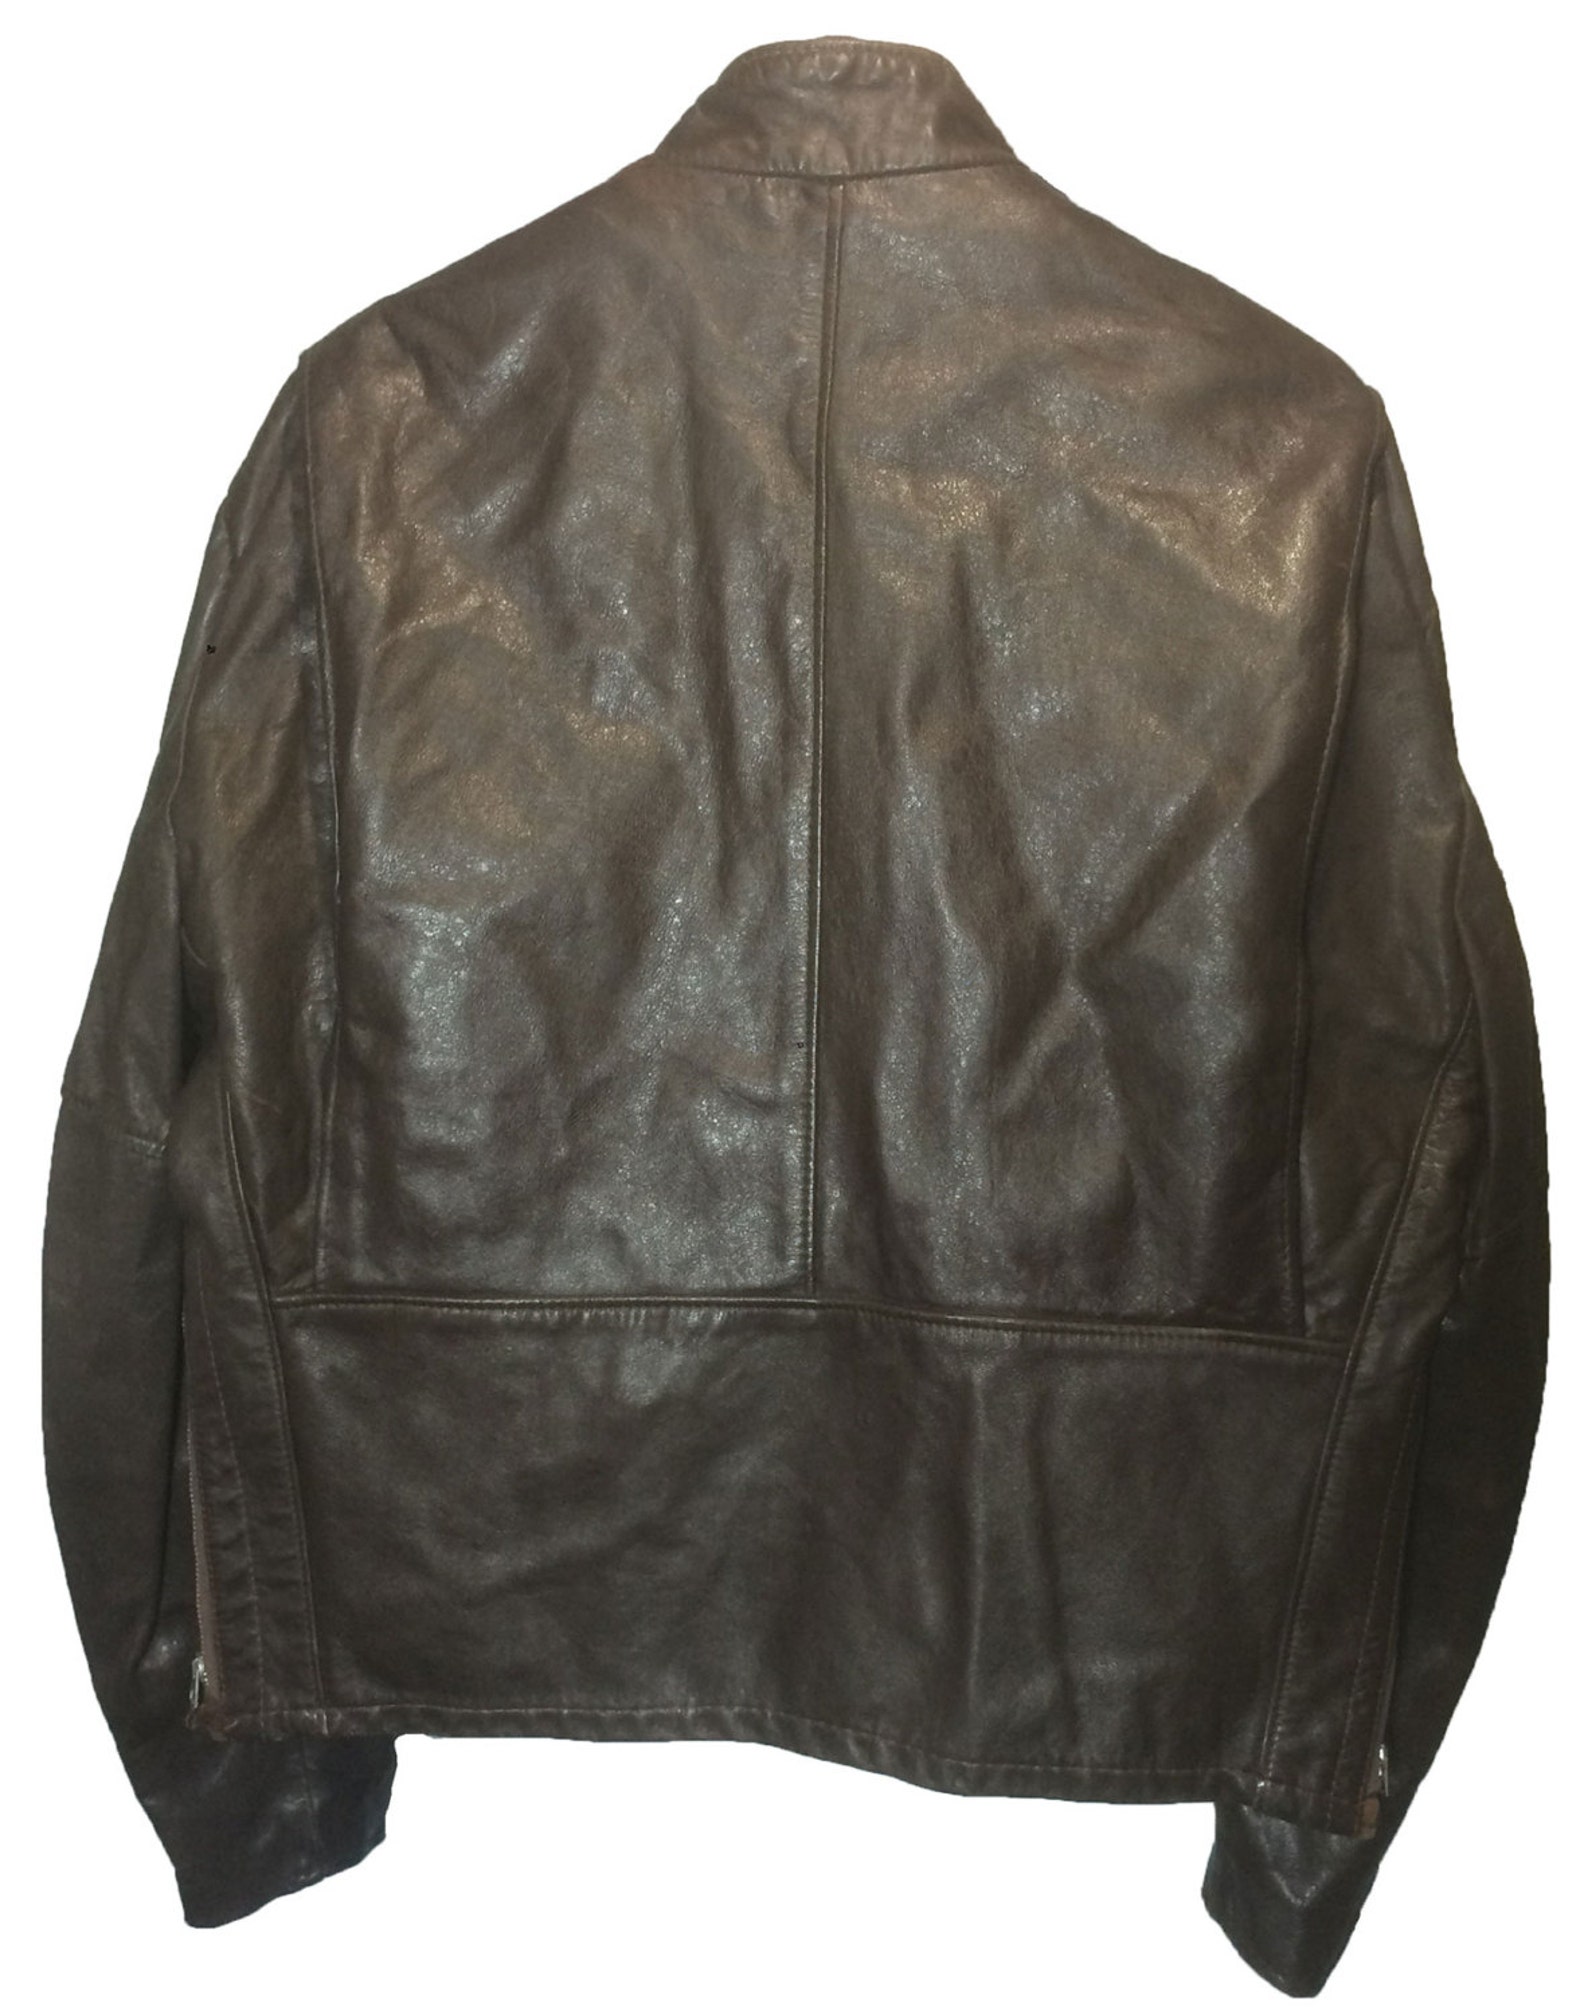 EXCELLED BROWN LEATHER Cafe Racer Motorcycle Jacket Men's - Etsy